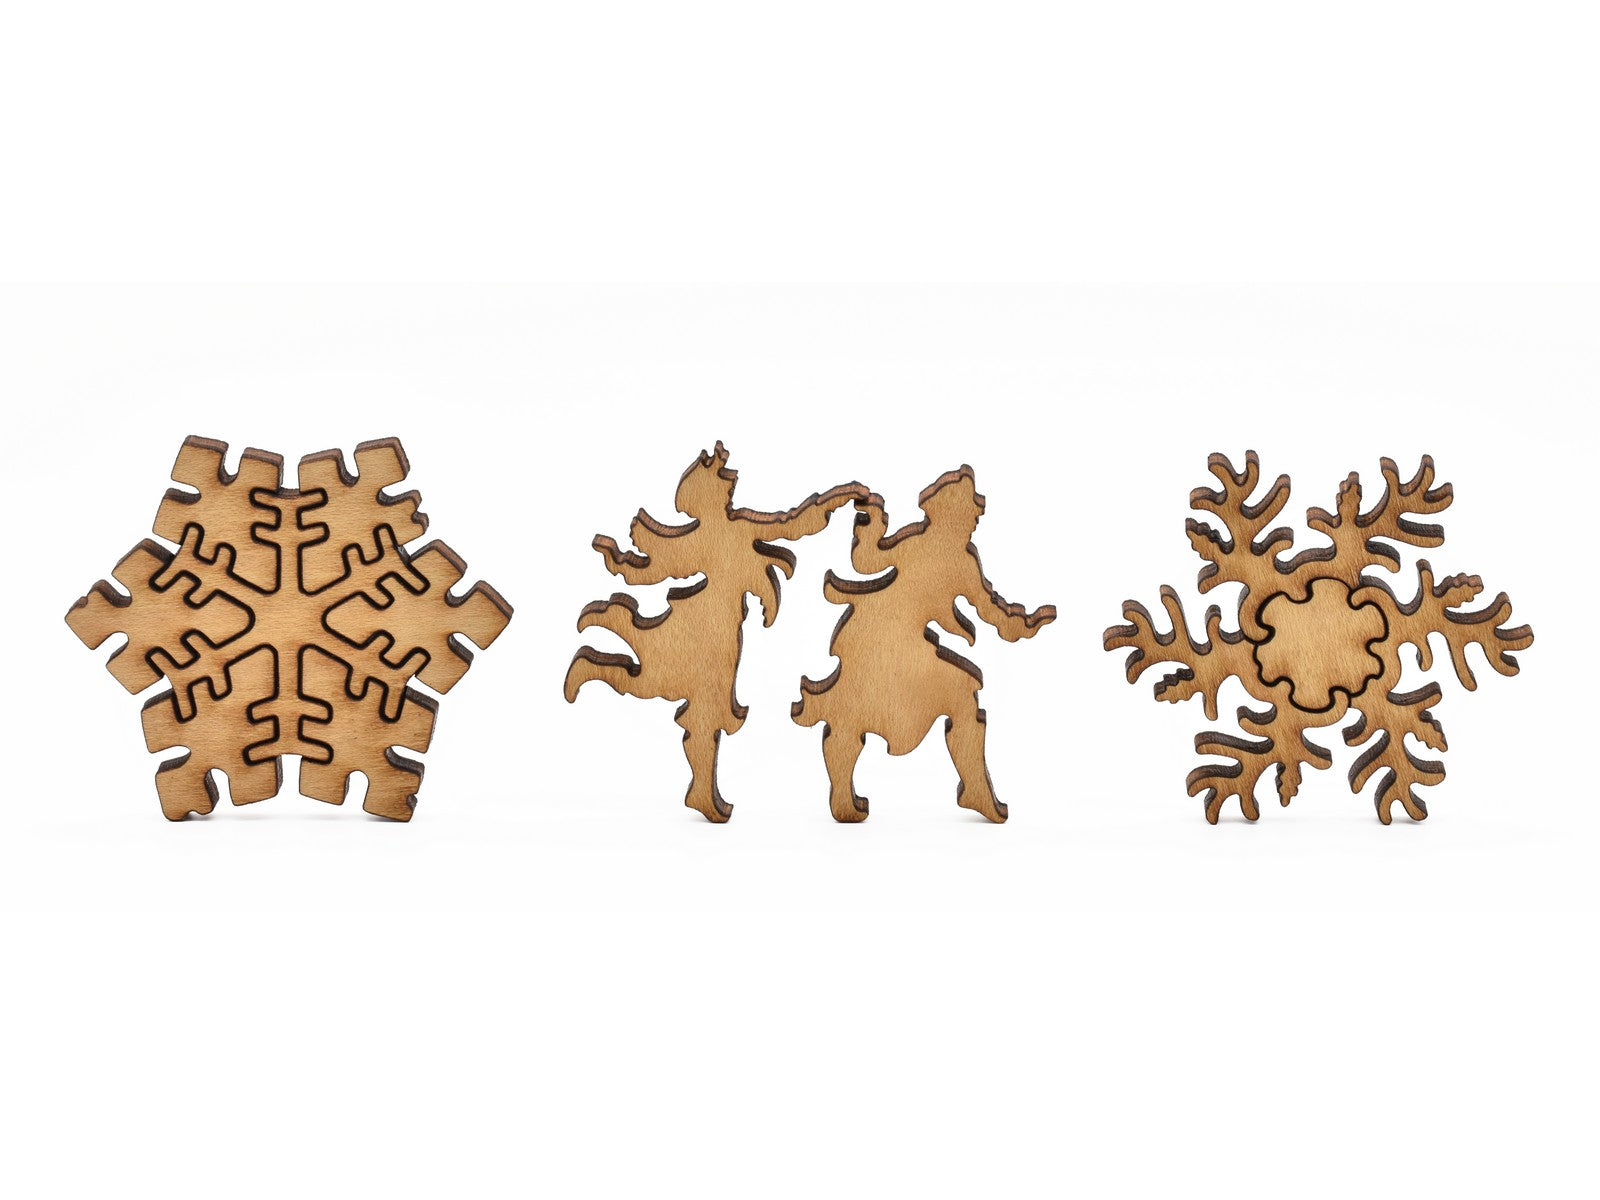 A closeup of pieces in the shape of snowflakes and people dancing.